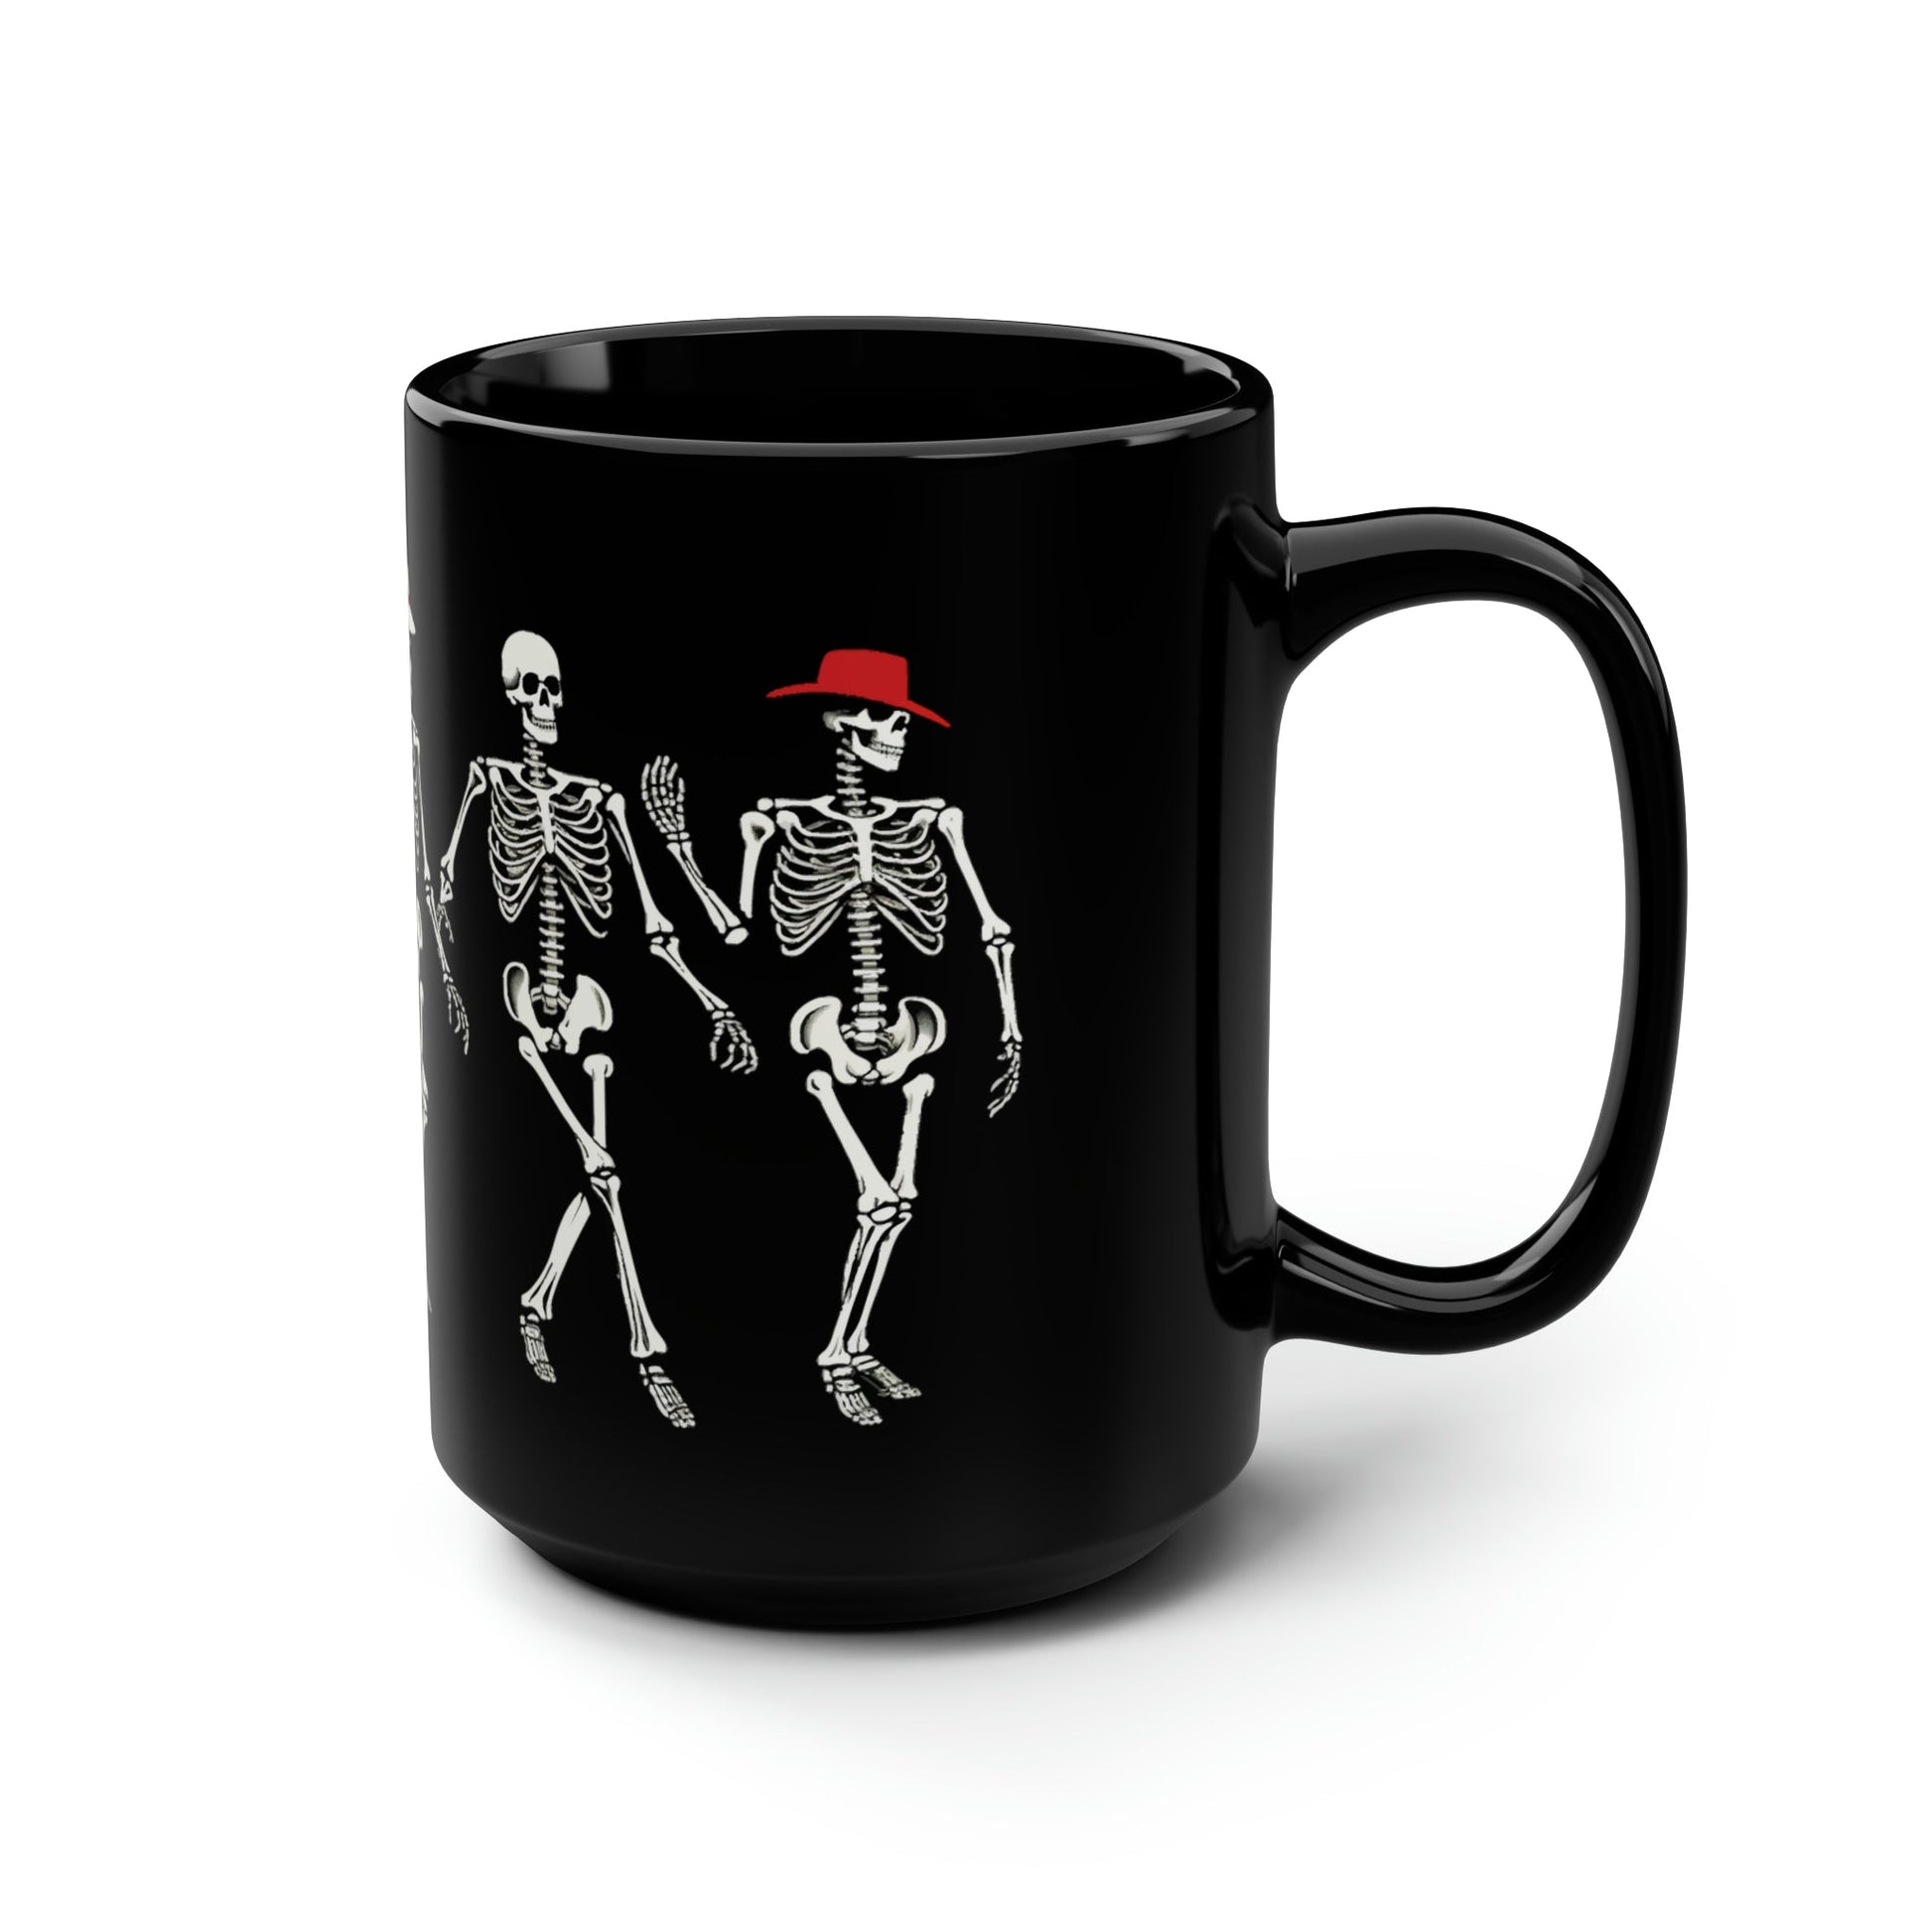 A side view of a black coffee mug with an image of dancing skeletons in hats printed on it.